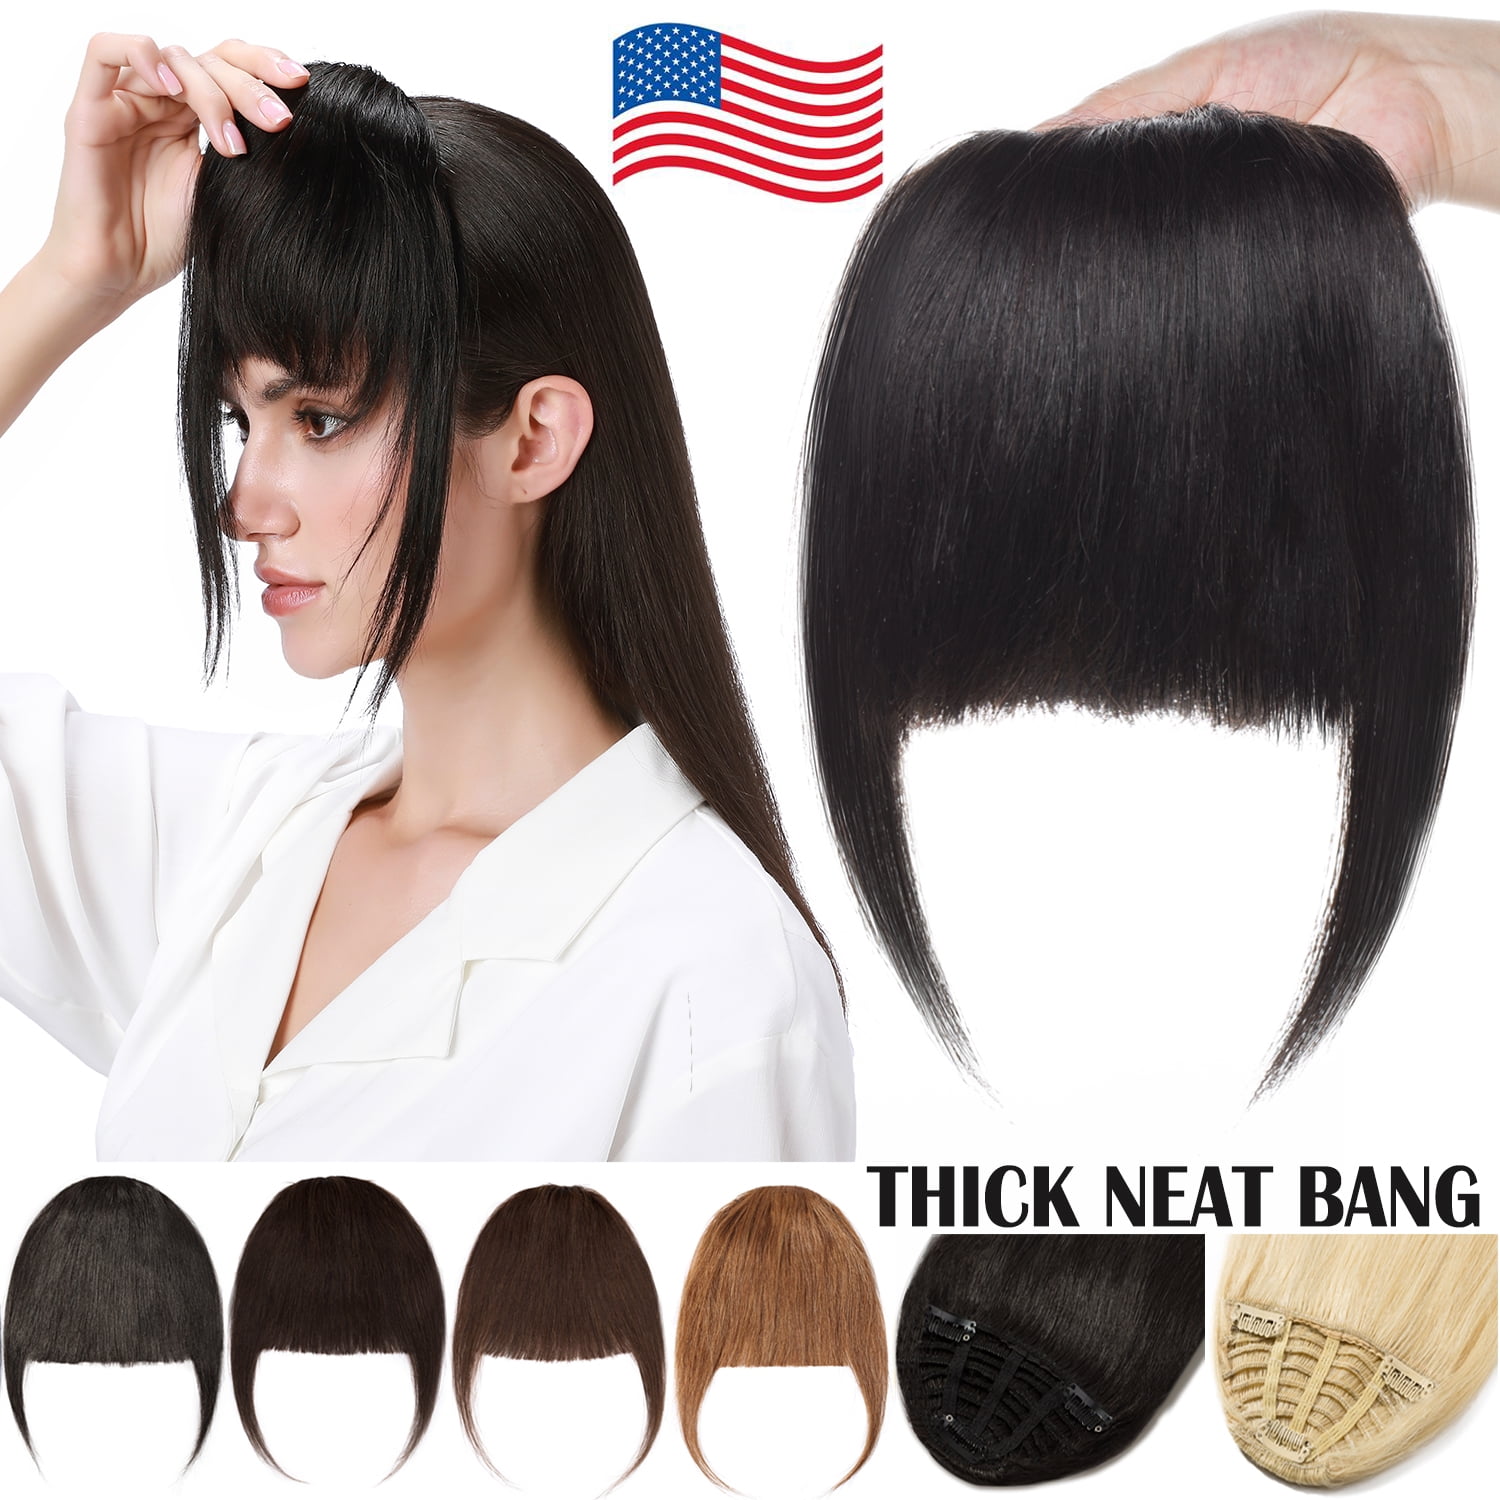 Benehair Clip In 100% Human Remy Hair Bangs Extensions Thick Neat Bangs  Fringes Front Hairpiece Straight Woman Black 3 Clips US 